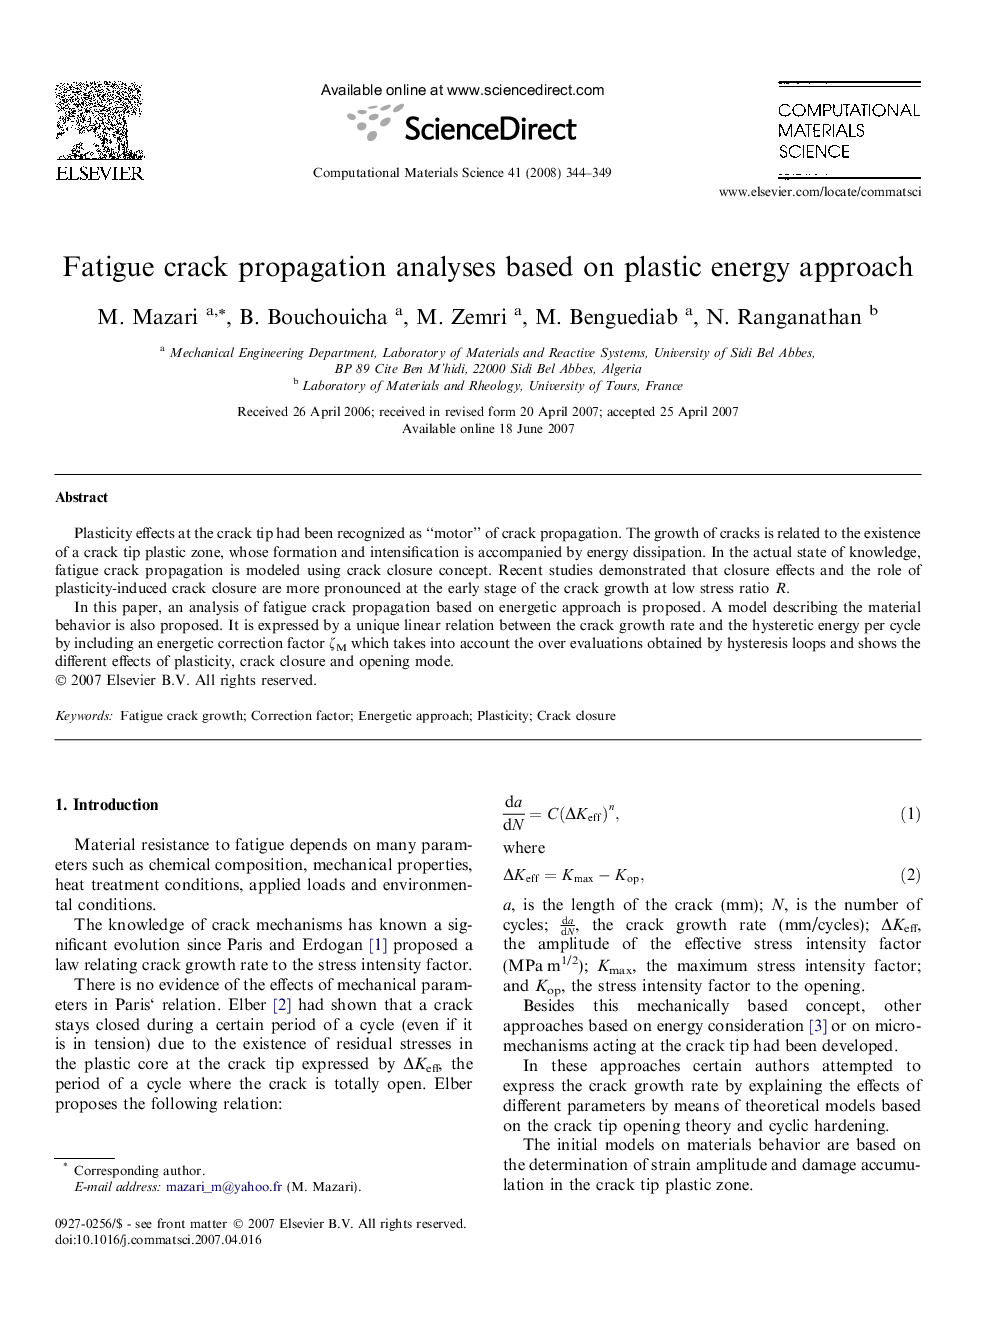 Fatigue crack propagation analyses based on plastic energy approach